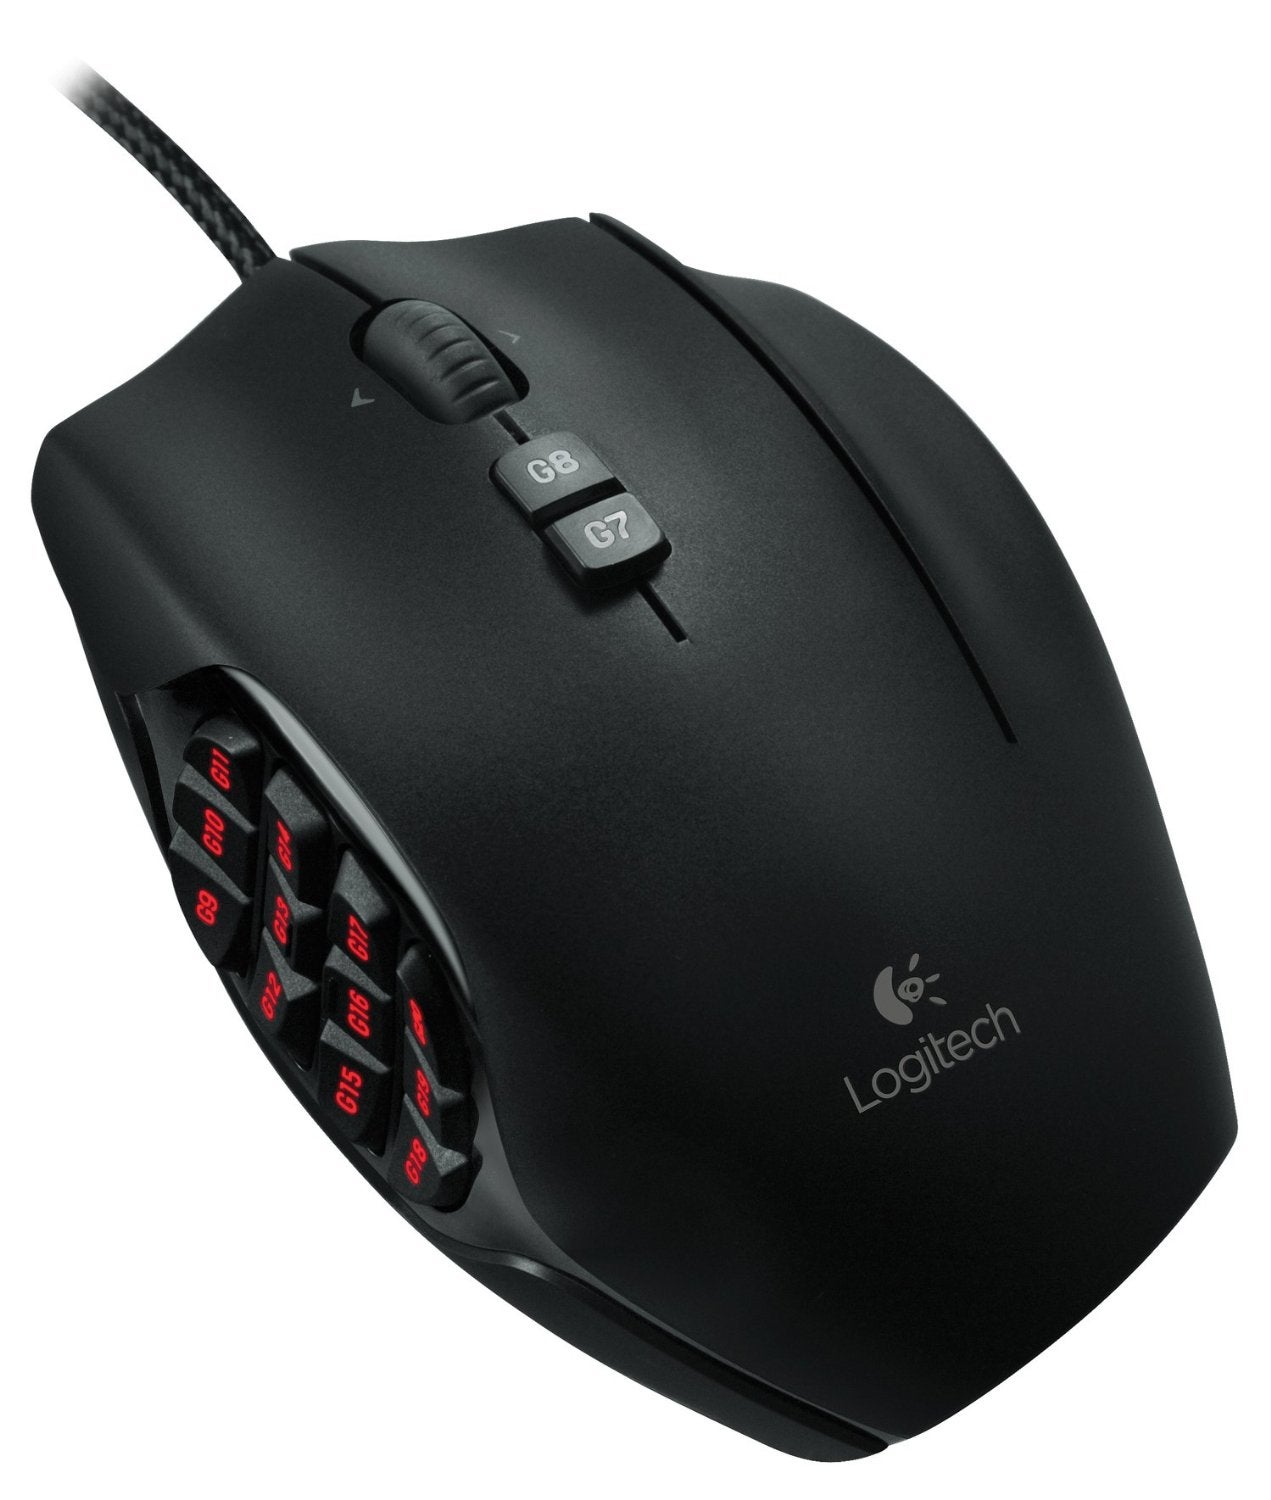 Image for Looks like Logitech is getting out of OEM mouse production business [Clarification]